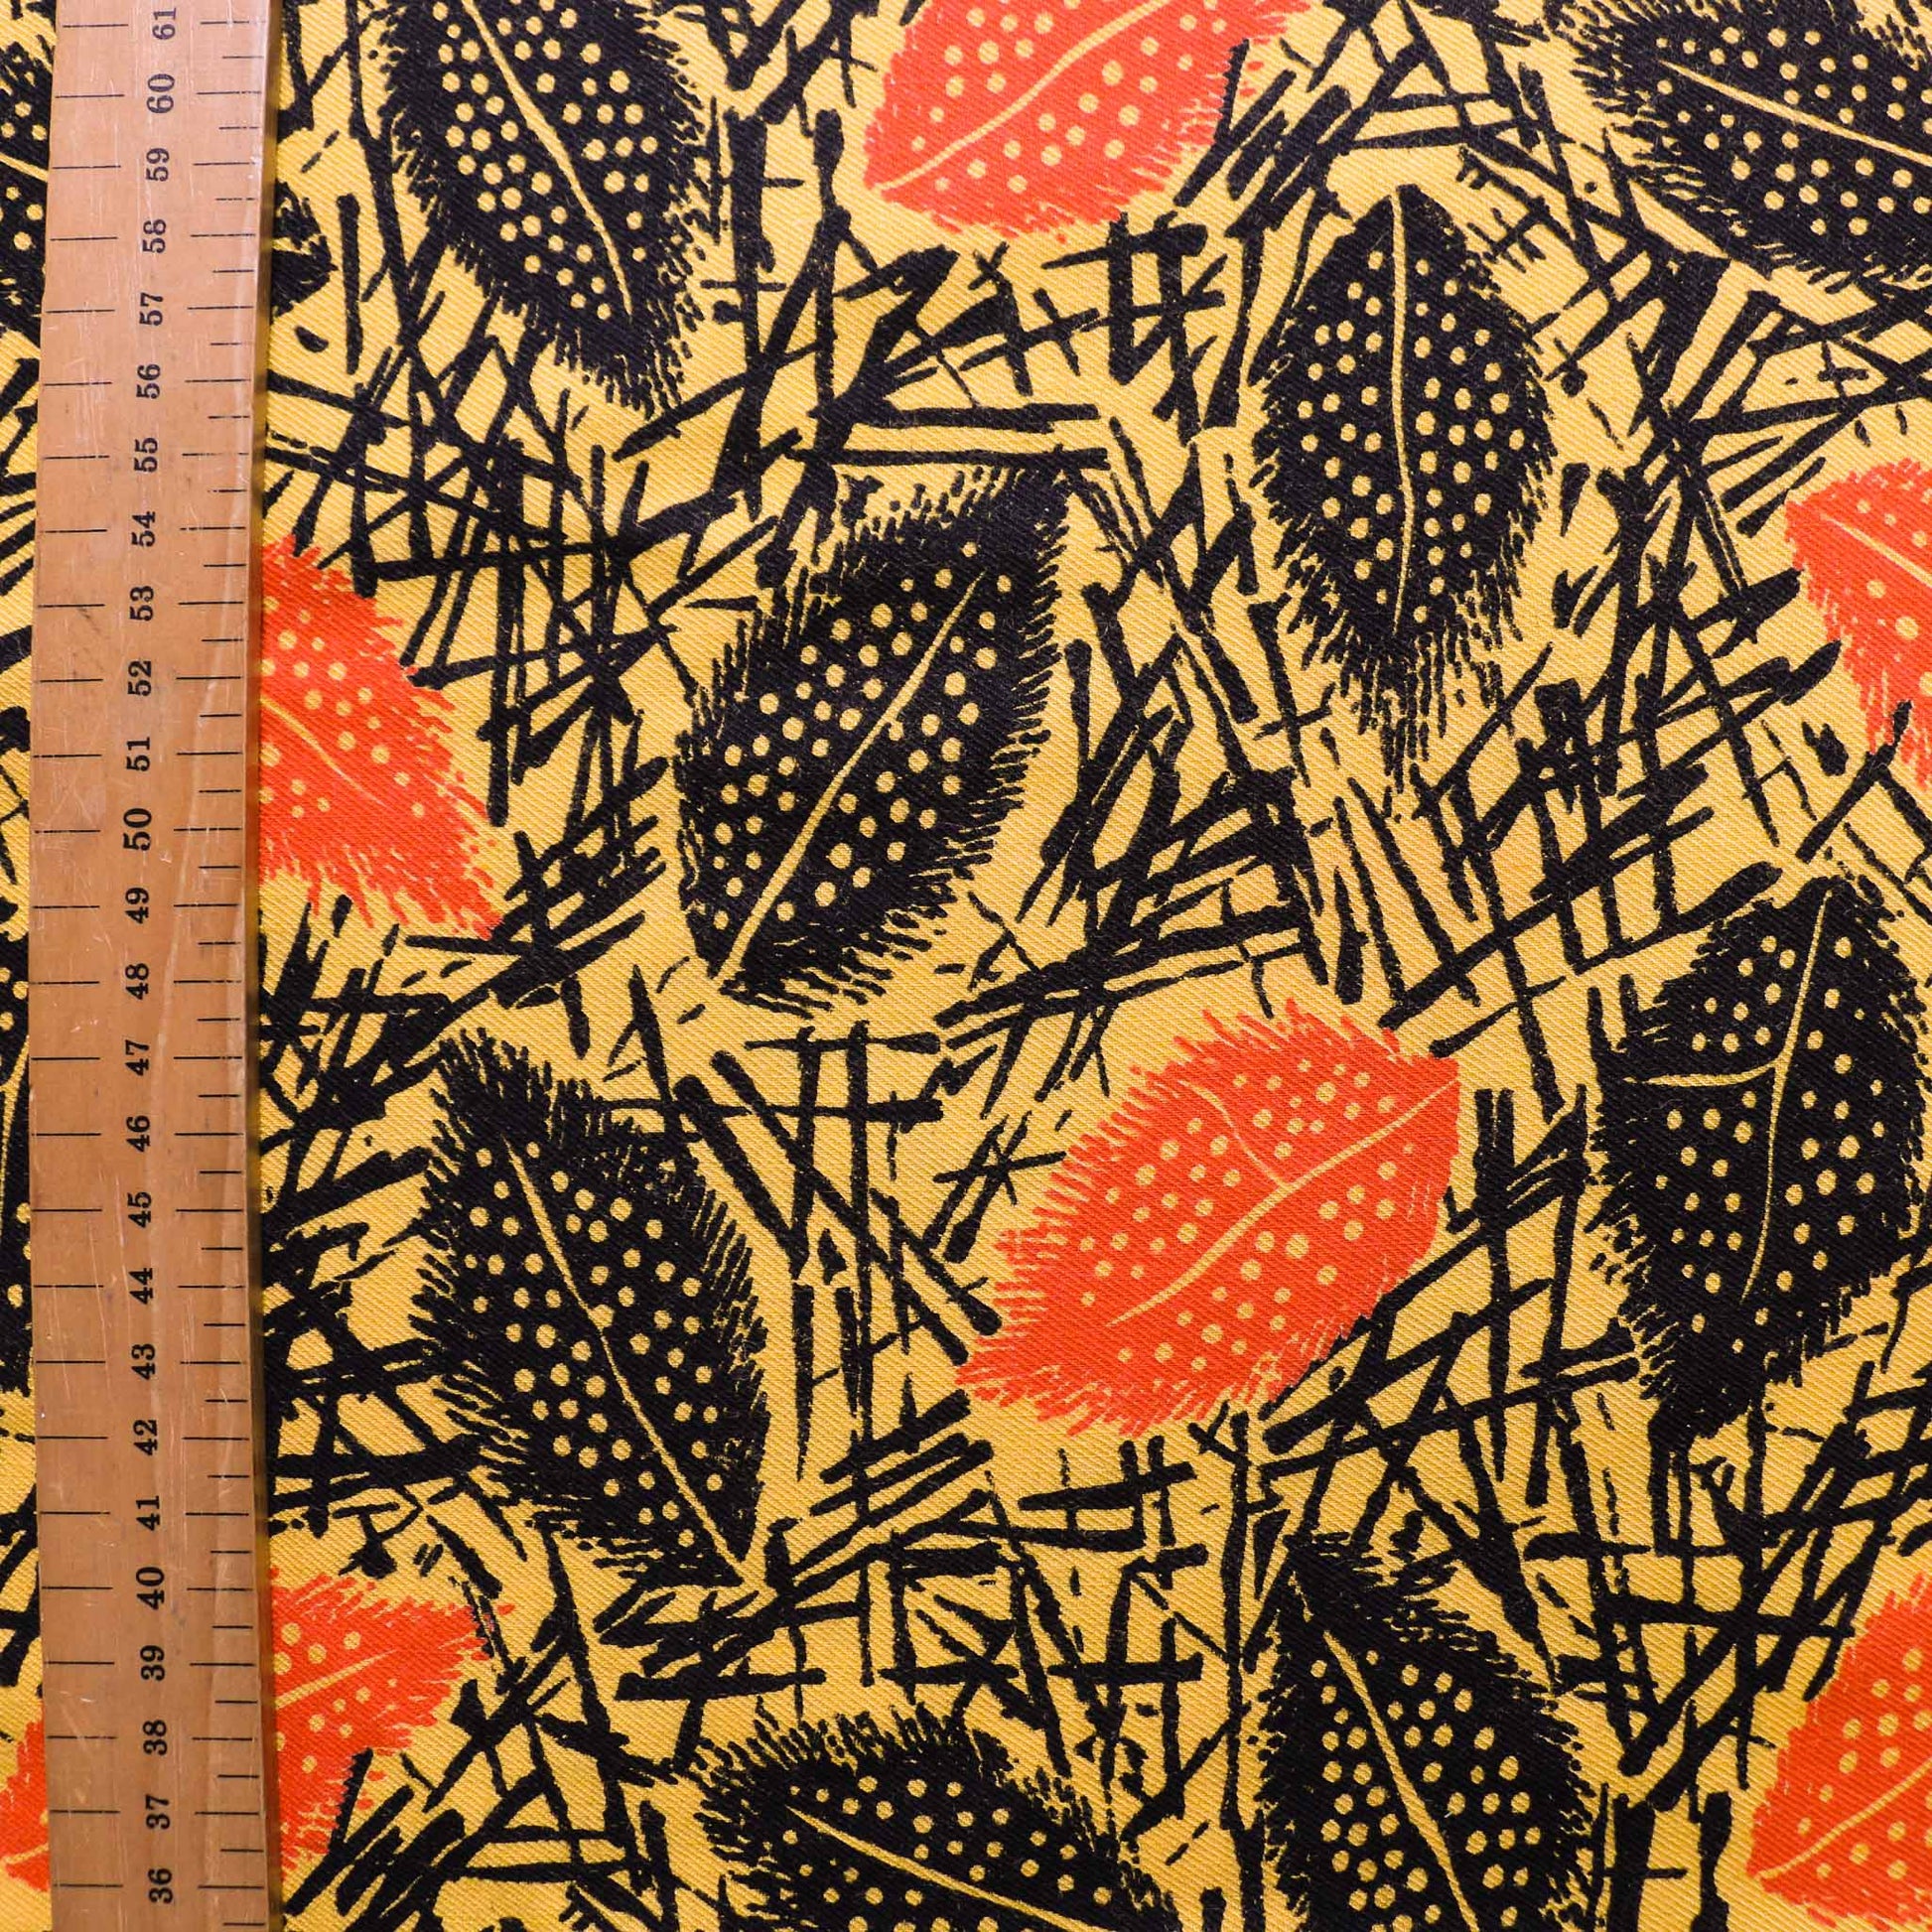 metre yellow vintage cotton twill dressmaking fabric for eco friendly sewing with leaves design prints